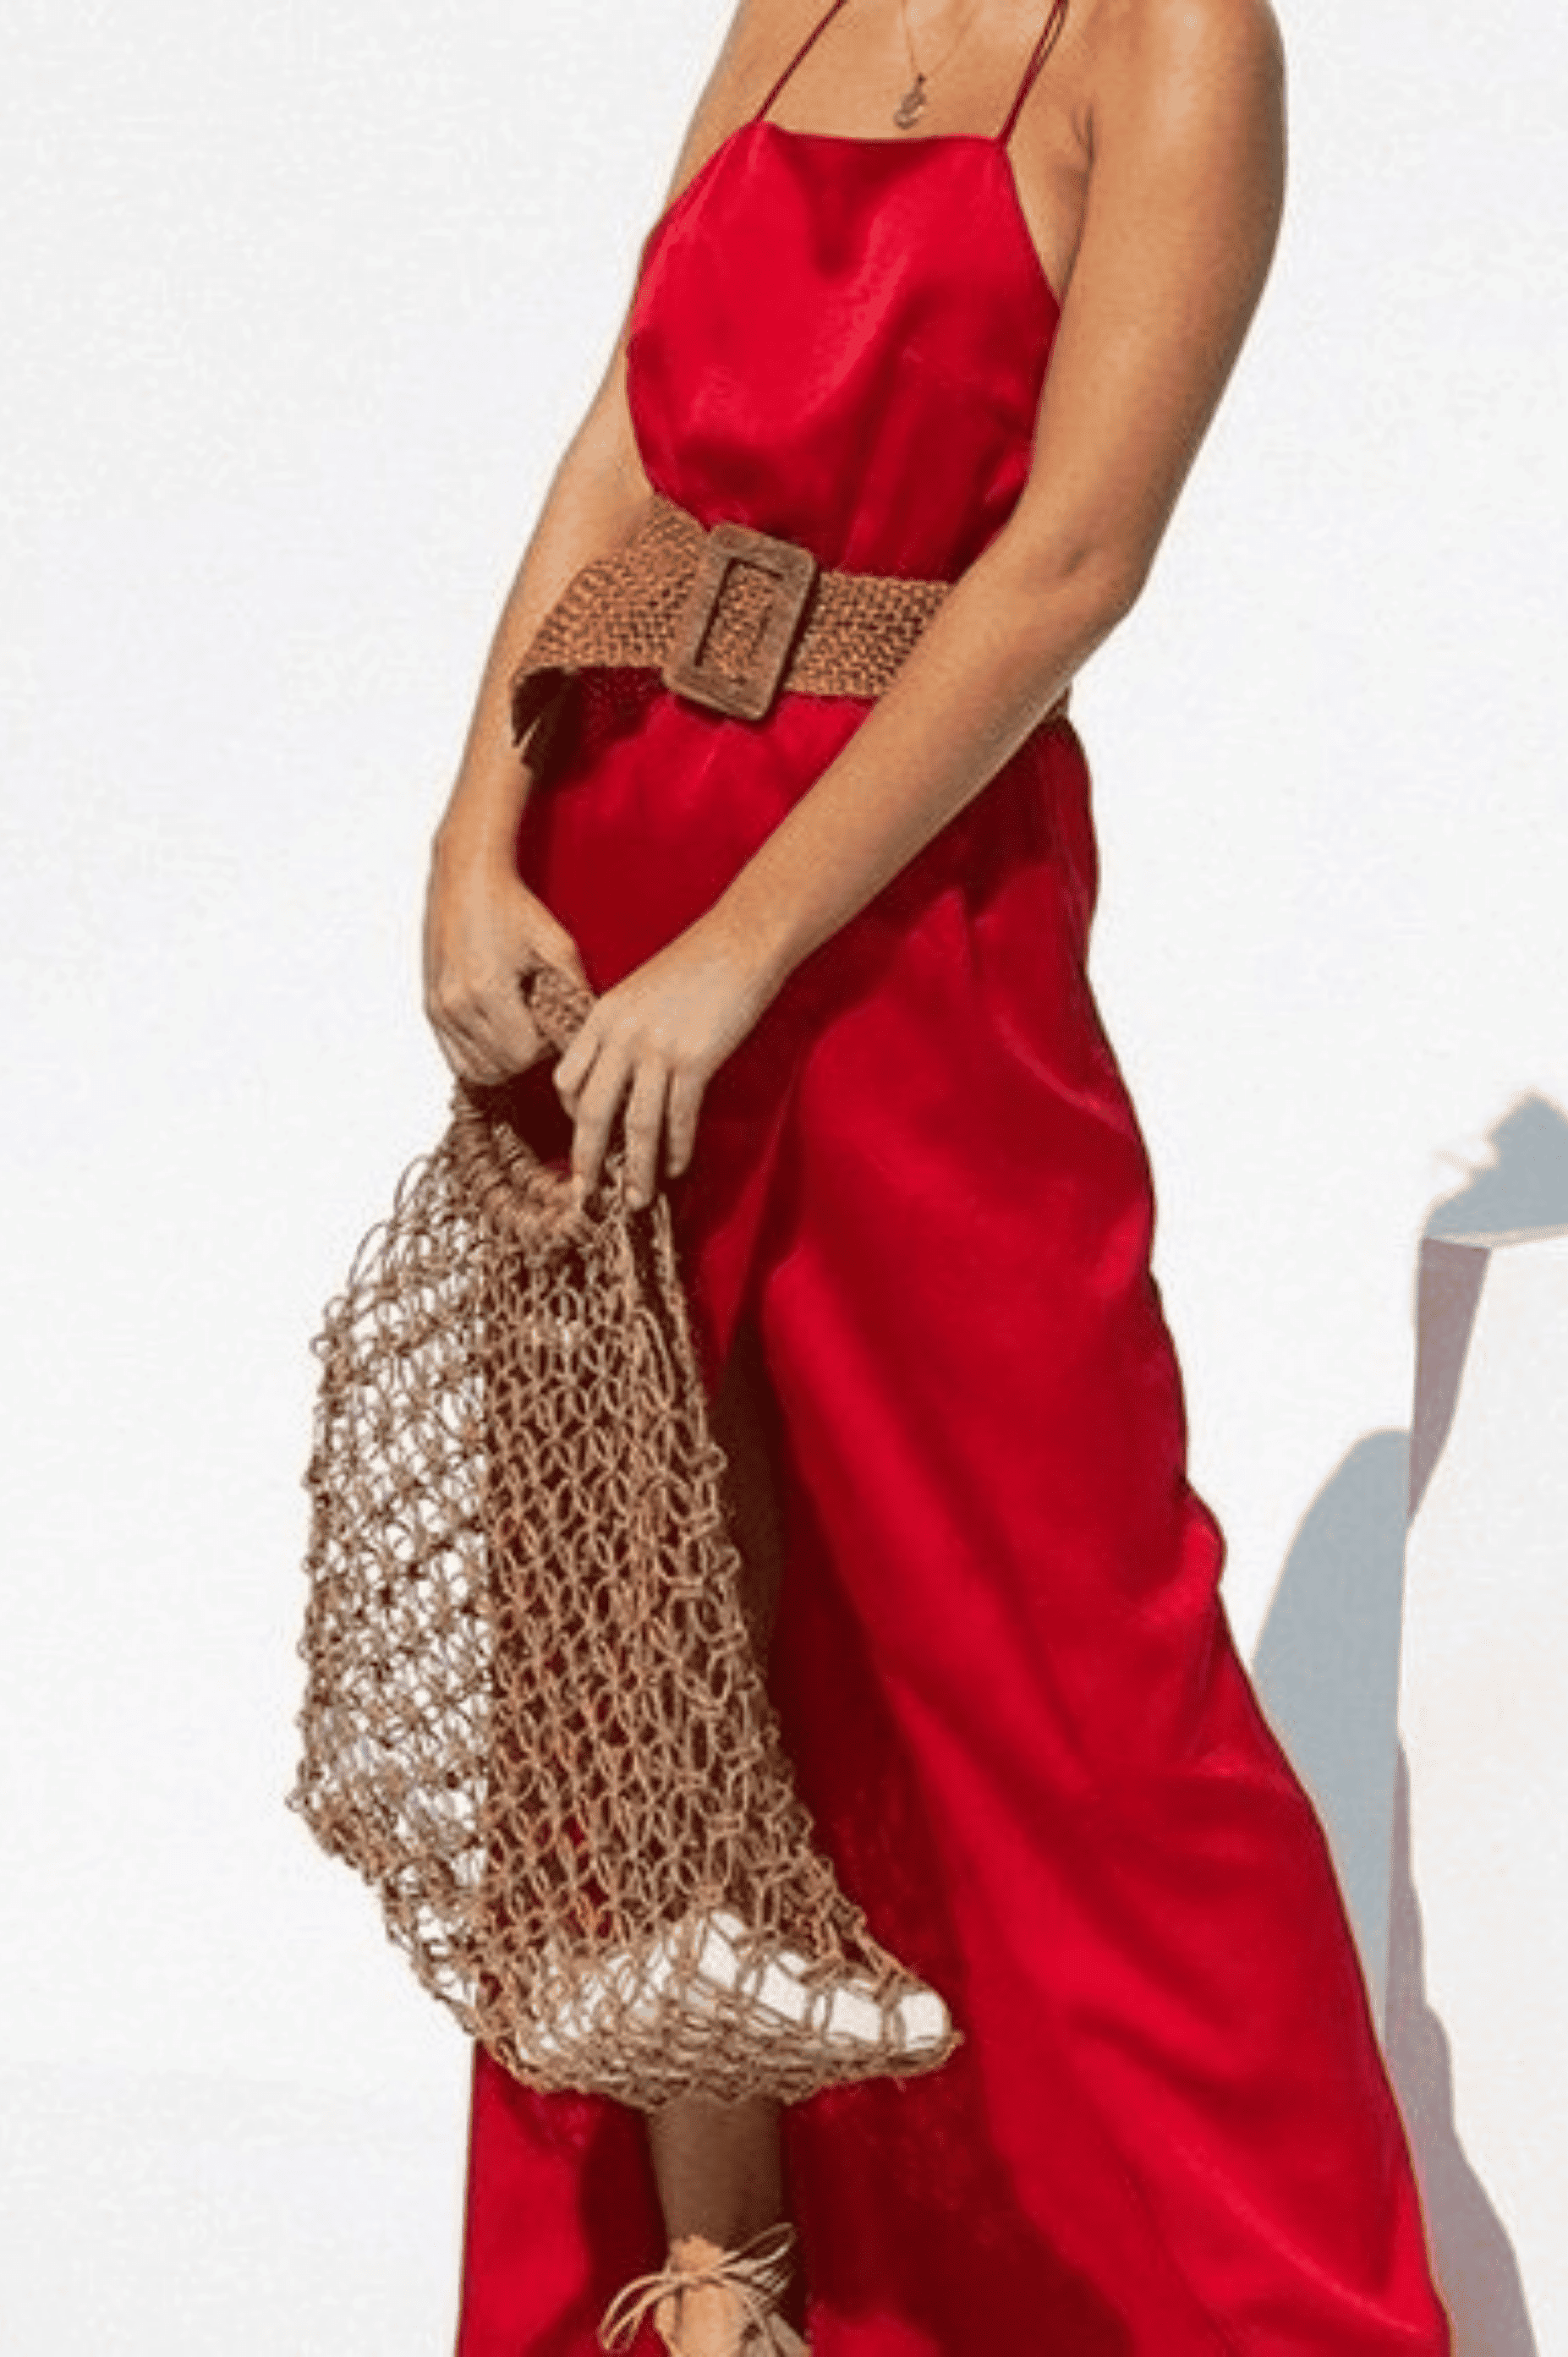 A woman in a red maxi dress holding a rattan bag.